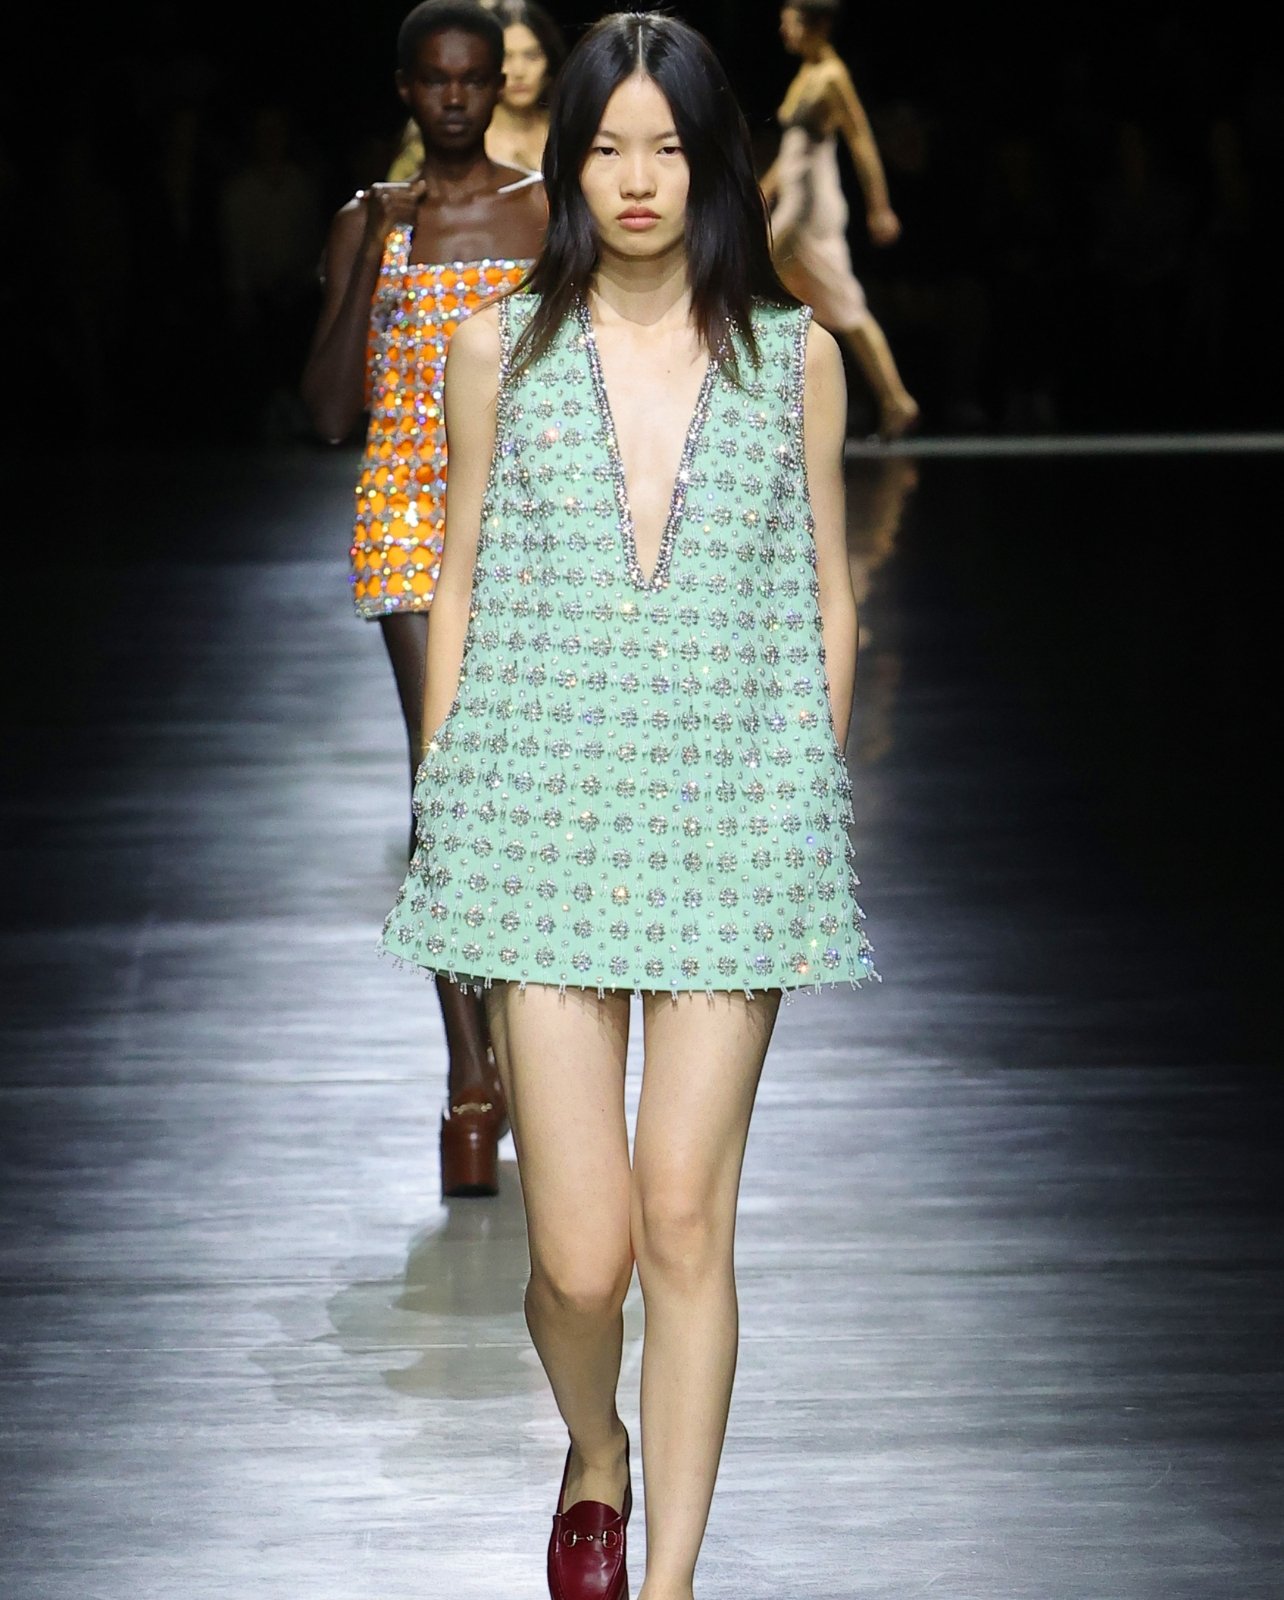 Female Model wearing a blue crystal embellished dress from Gucci’s spring/summer 24 collection runway show